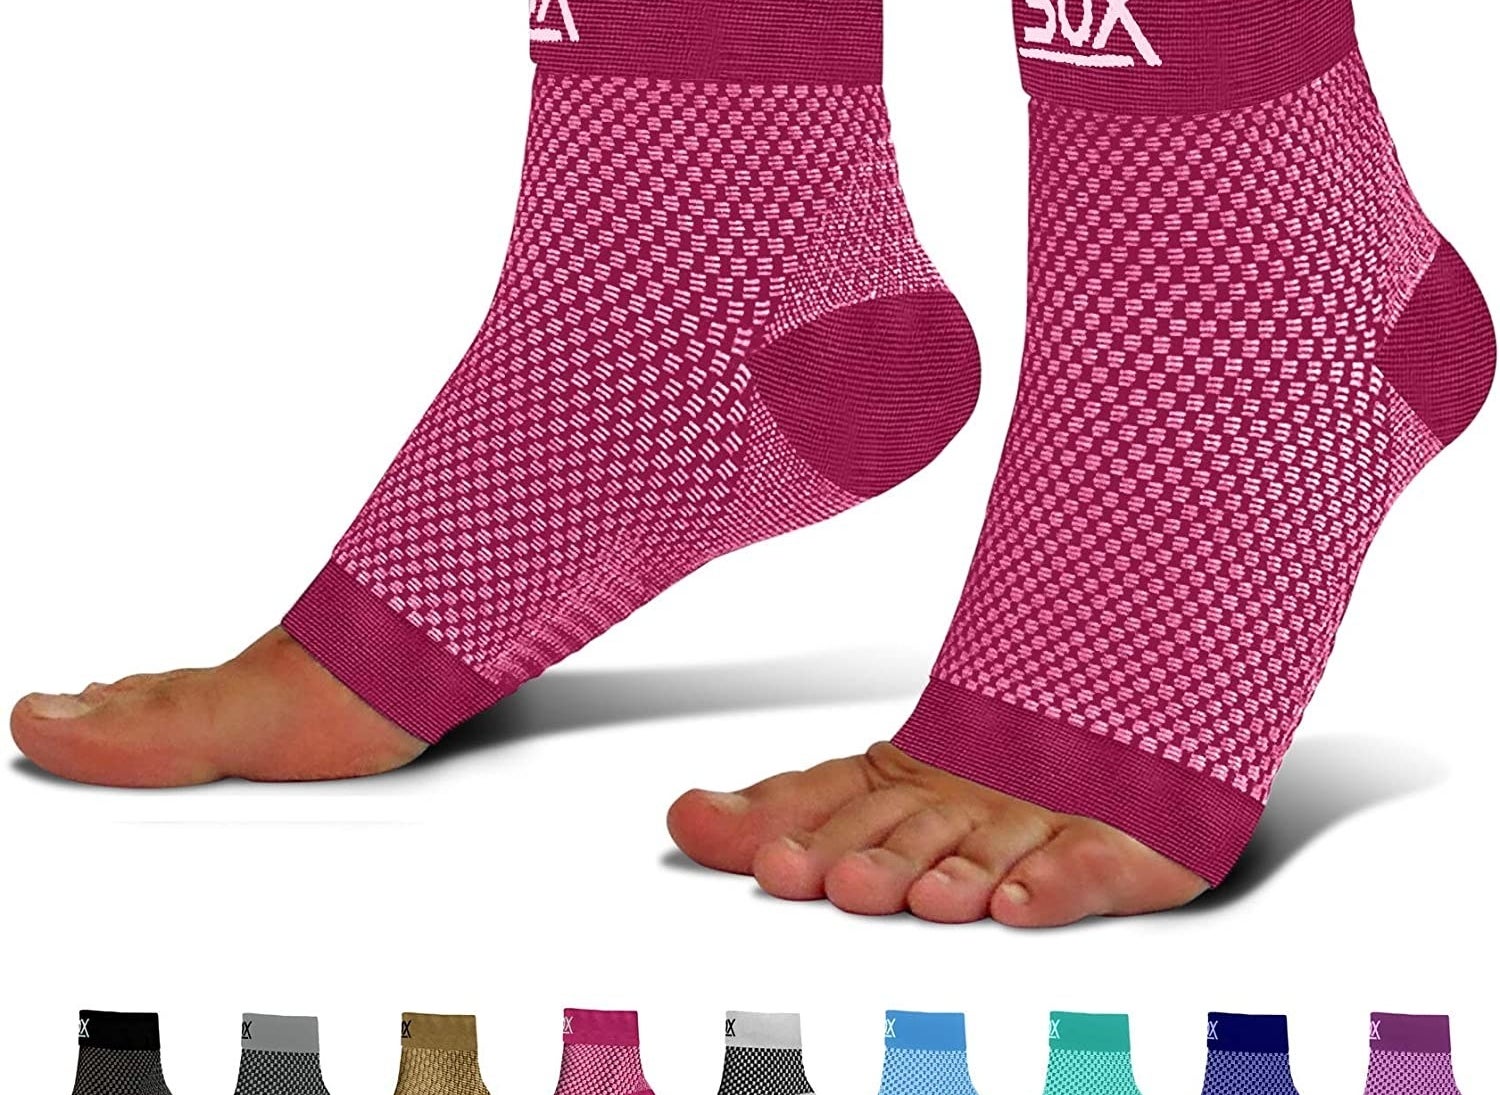 model wearing the pink compression socks, which show their toes